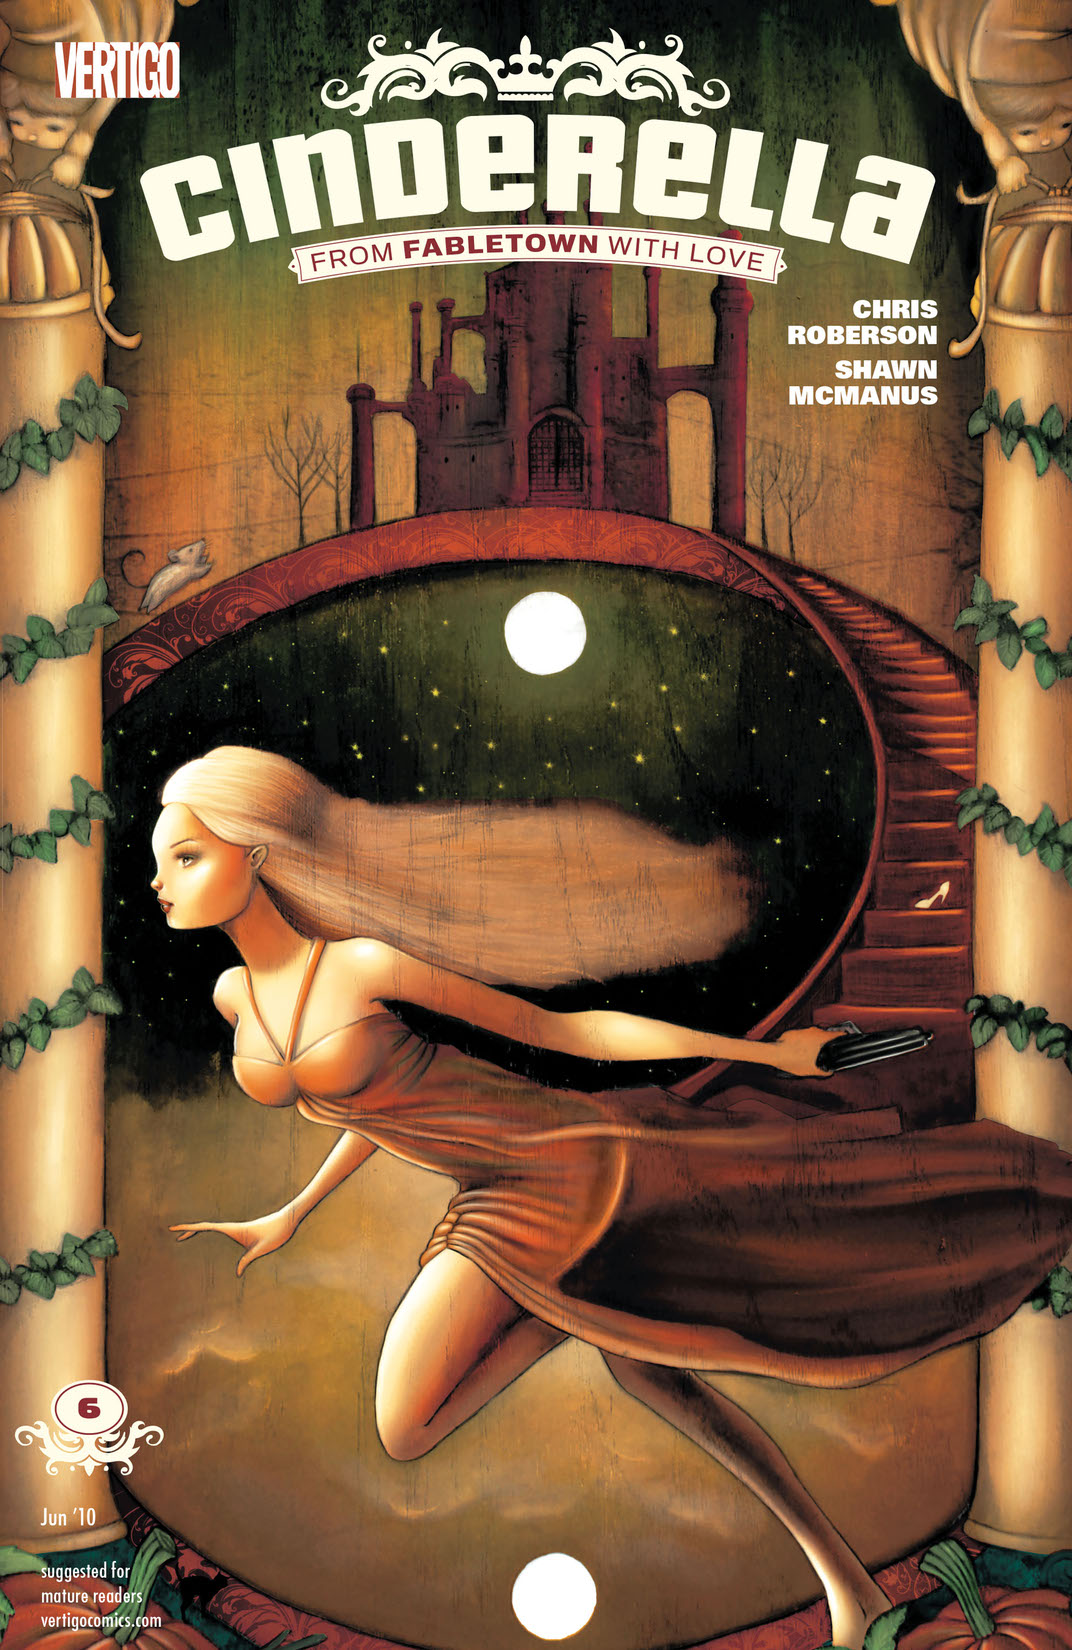 Cinderella: From Fabletown with Love #6 preview images